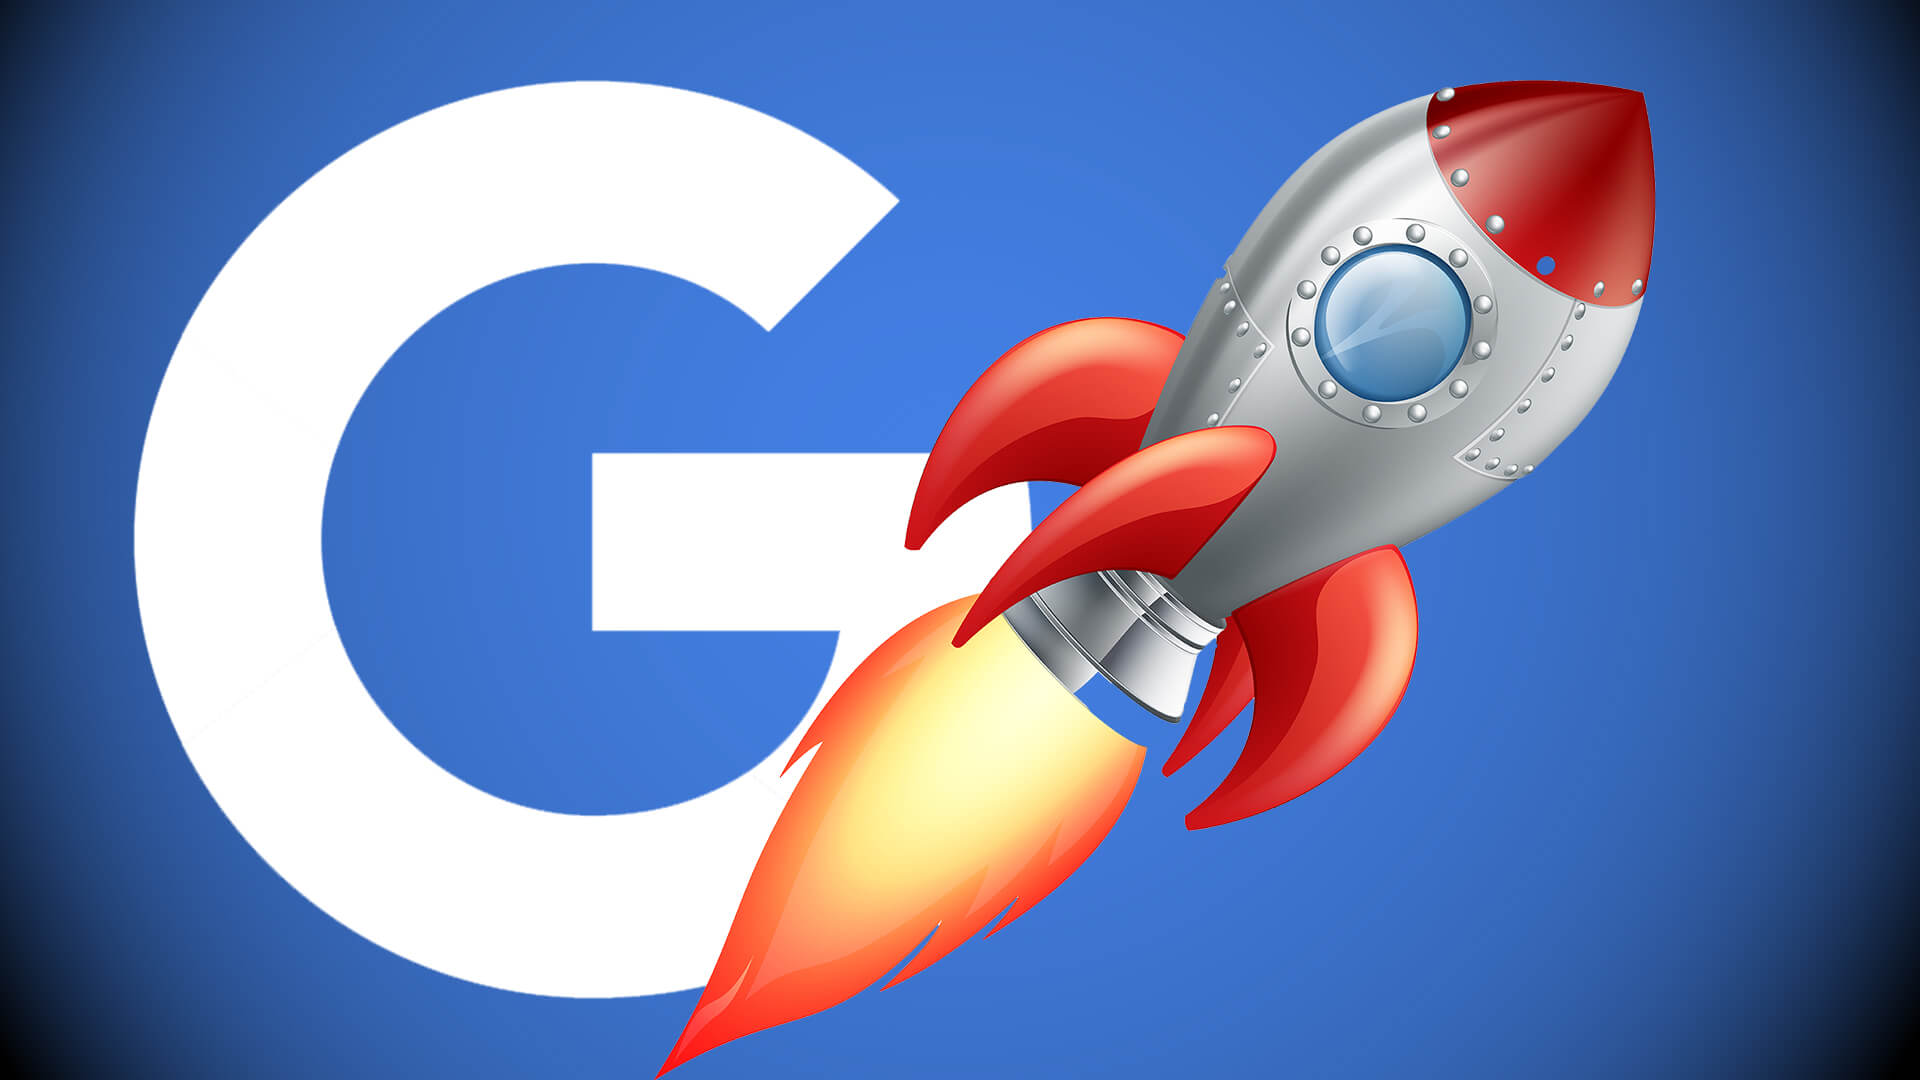 Google makes it easier to see and share publishers’ real URLs from AMP pages